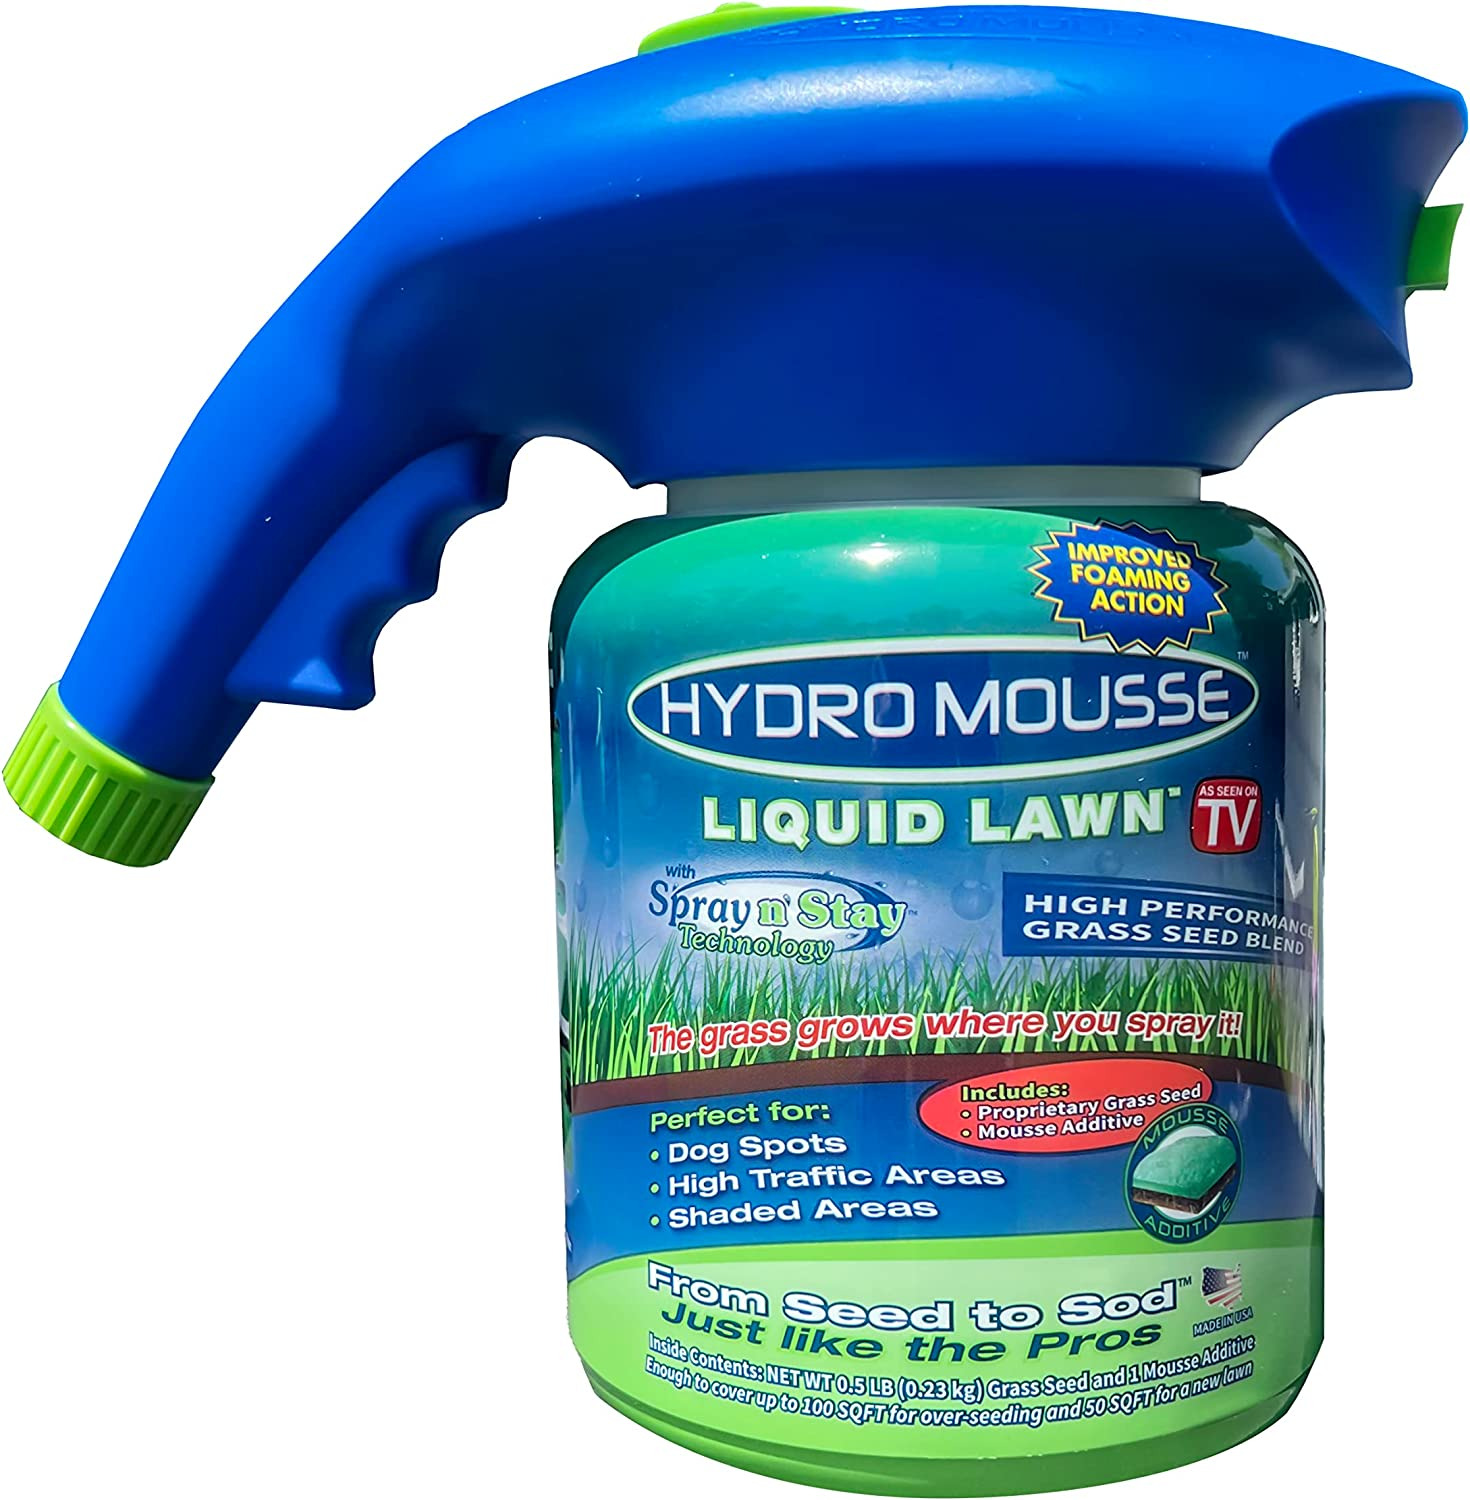 Hydro Mousse Liquid Lawn System - Grow Grass Where You Spray It - Made in USA✅